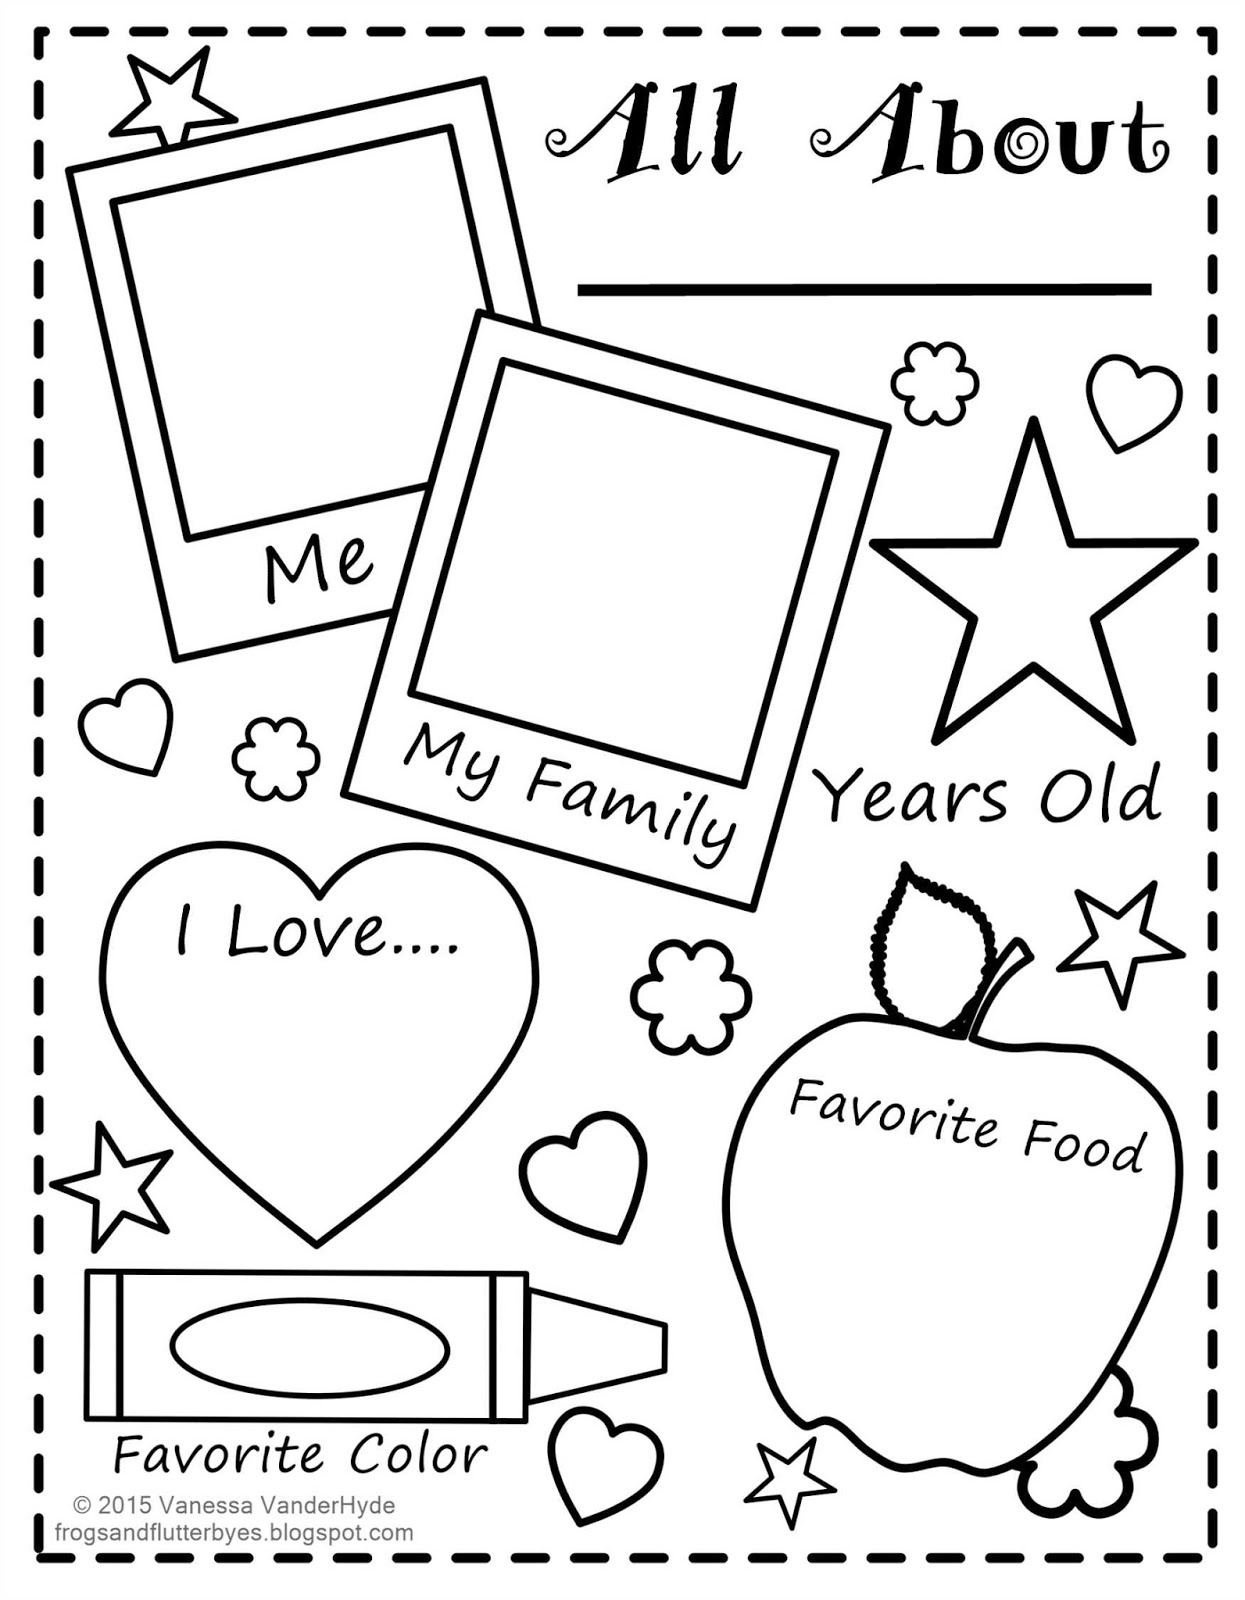 The Frogs And The Flutterbyes: All About Me Free Printable - Free Printable All About Me Poster